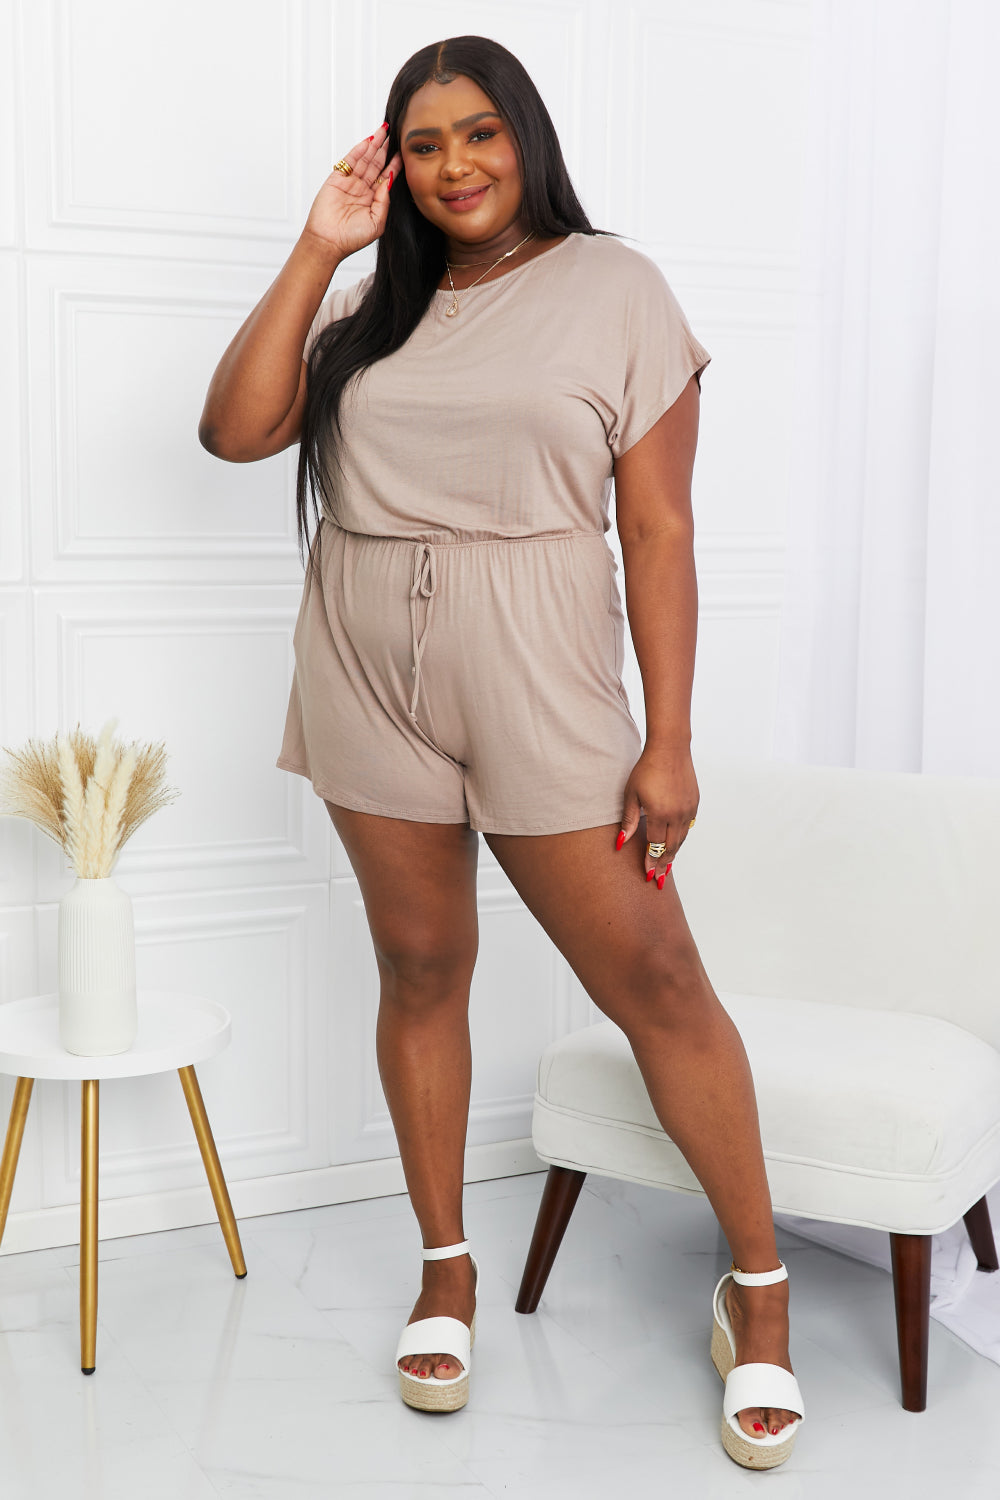 CY Fashion Full Size Round Neck Short Sleeve Romper with Pockets